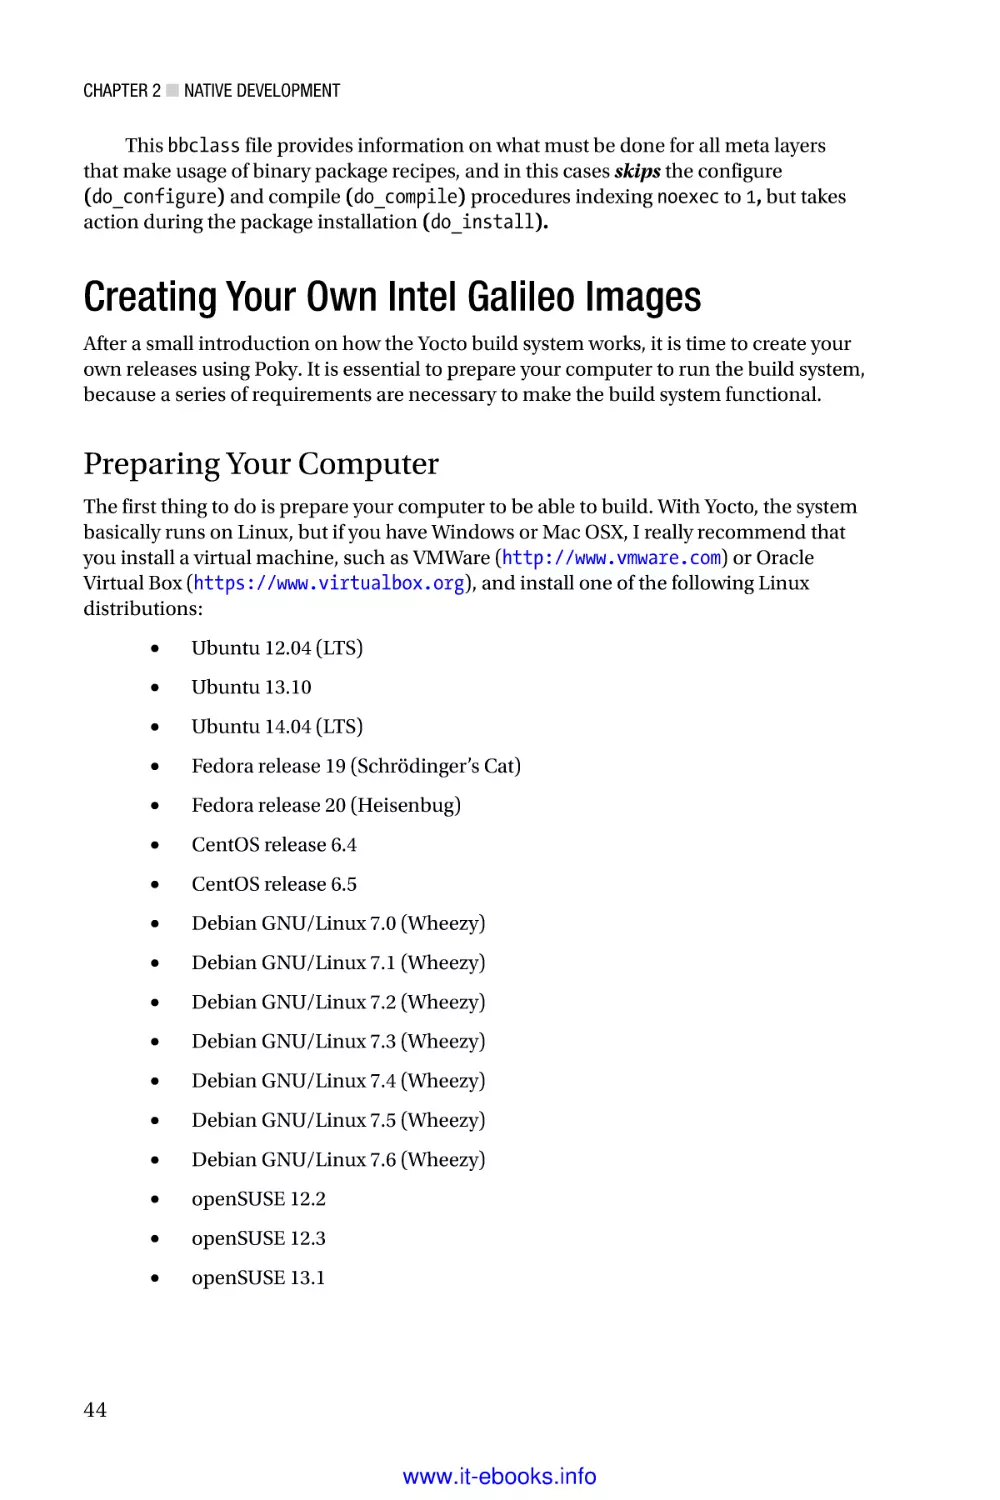 Creating Your Own Intel Galileo Images
Preparing Your Computer